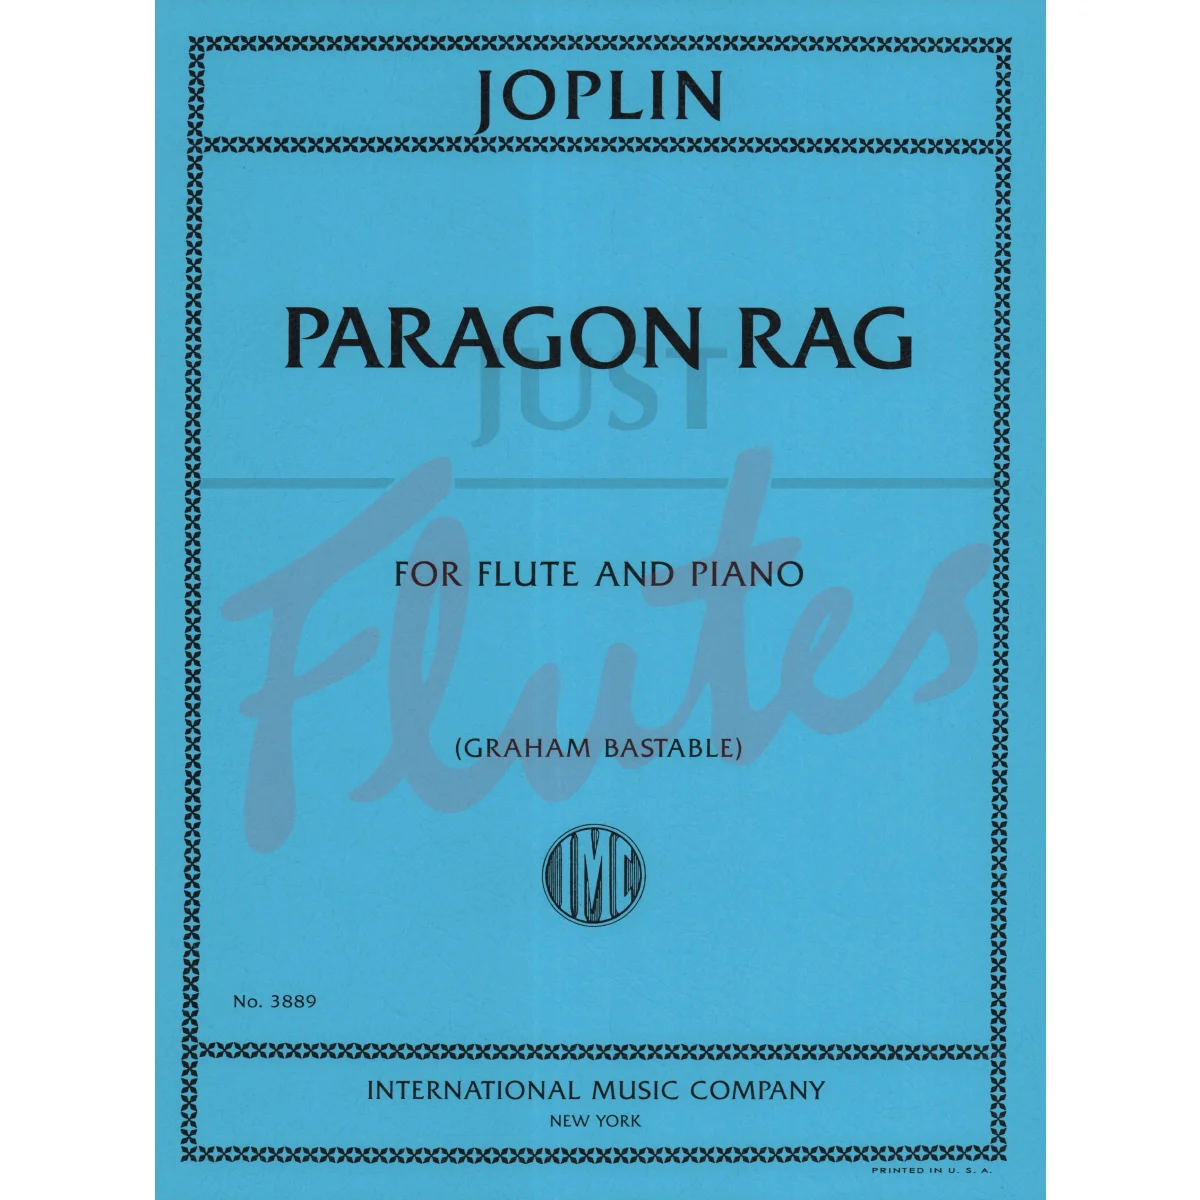 Paragon Rag for Flute and Piano